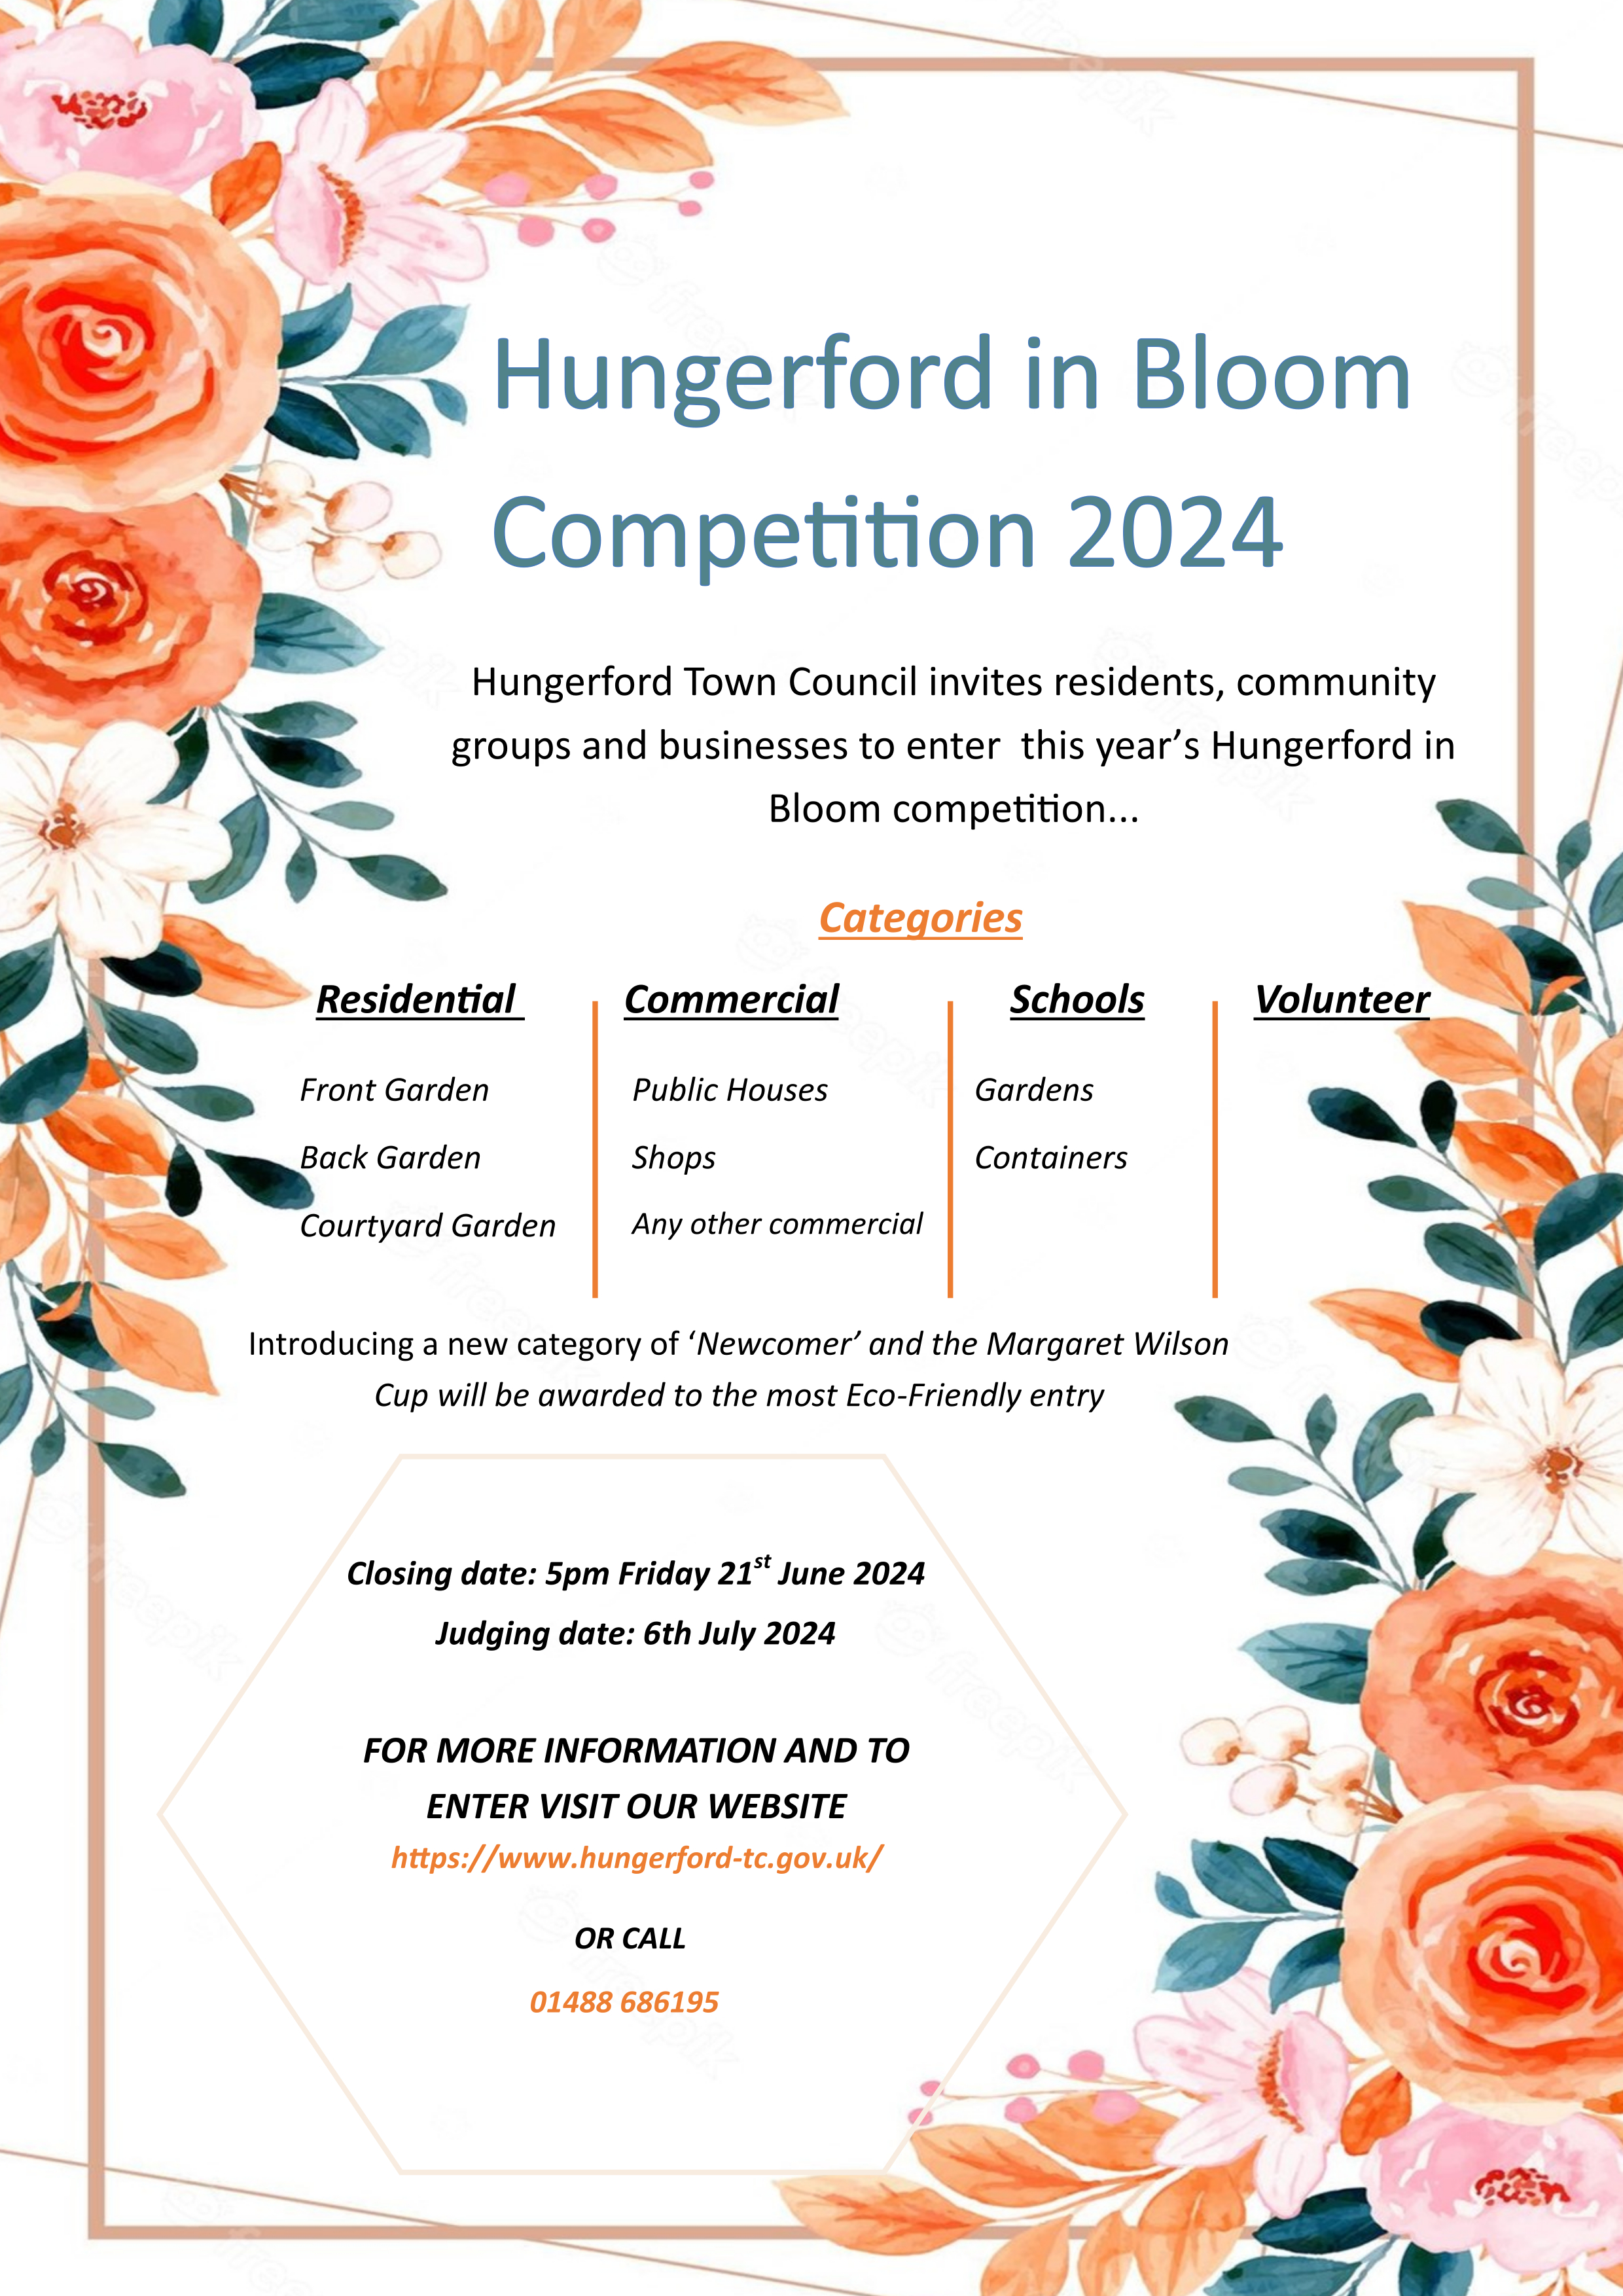 Hungerford in Bloom 2024